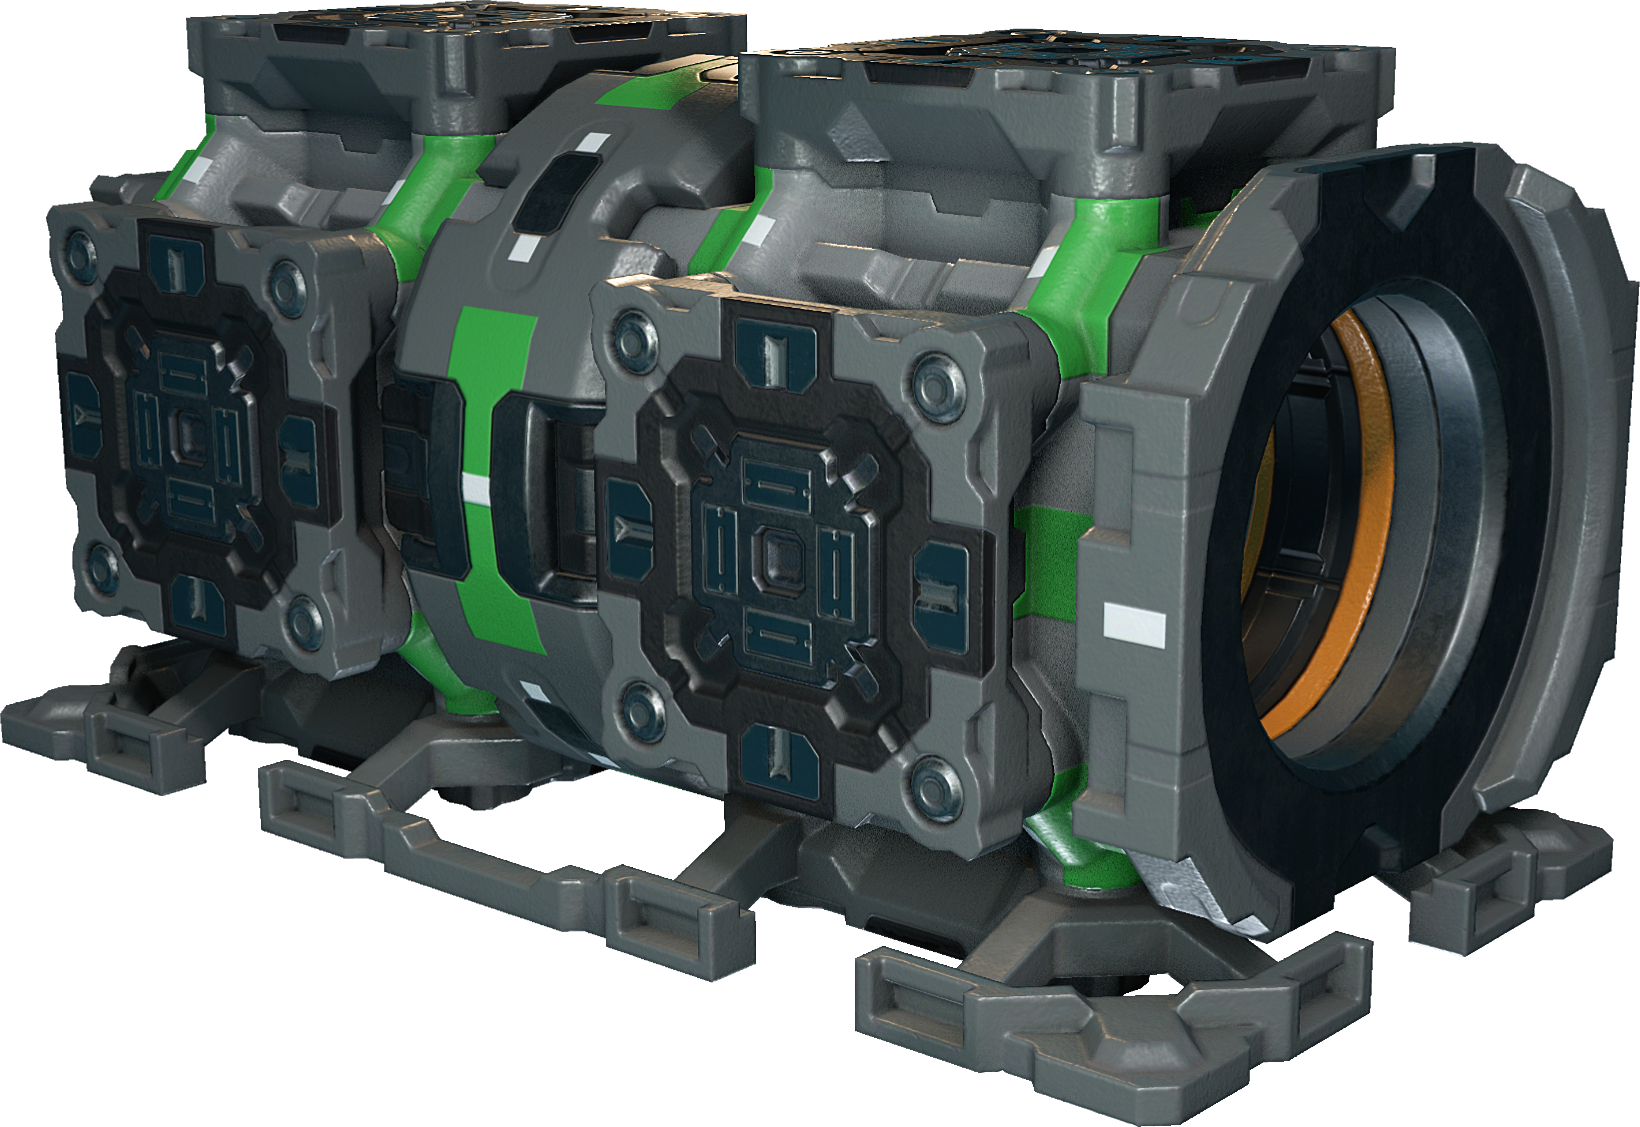 Starbase devices generator fuelchamber.png